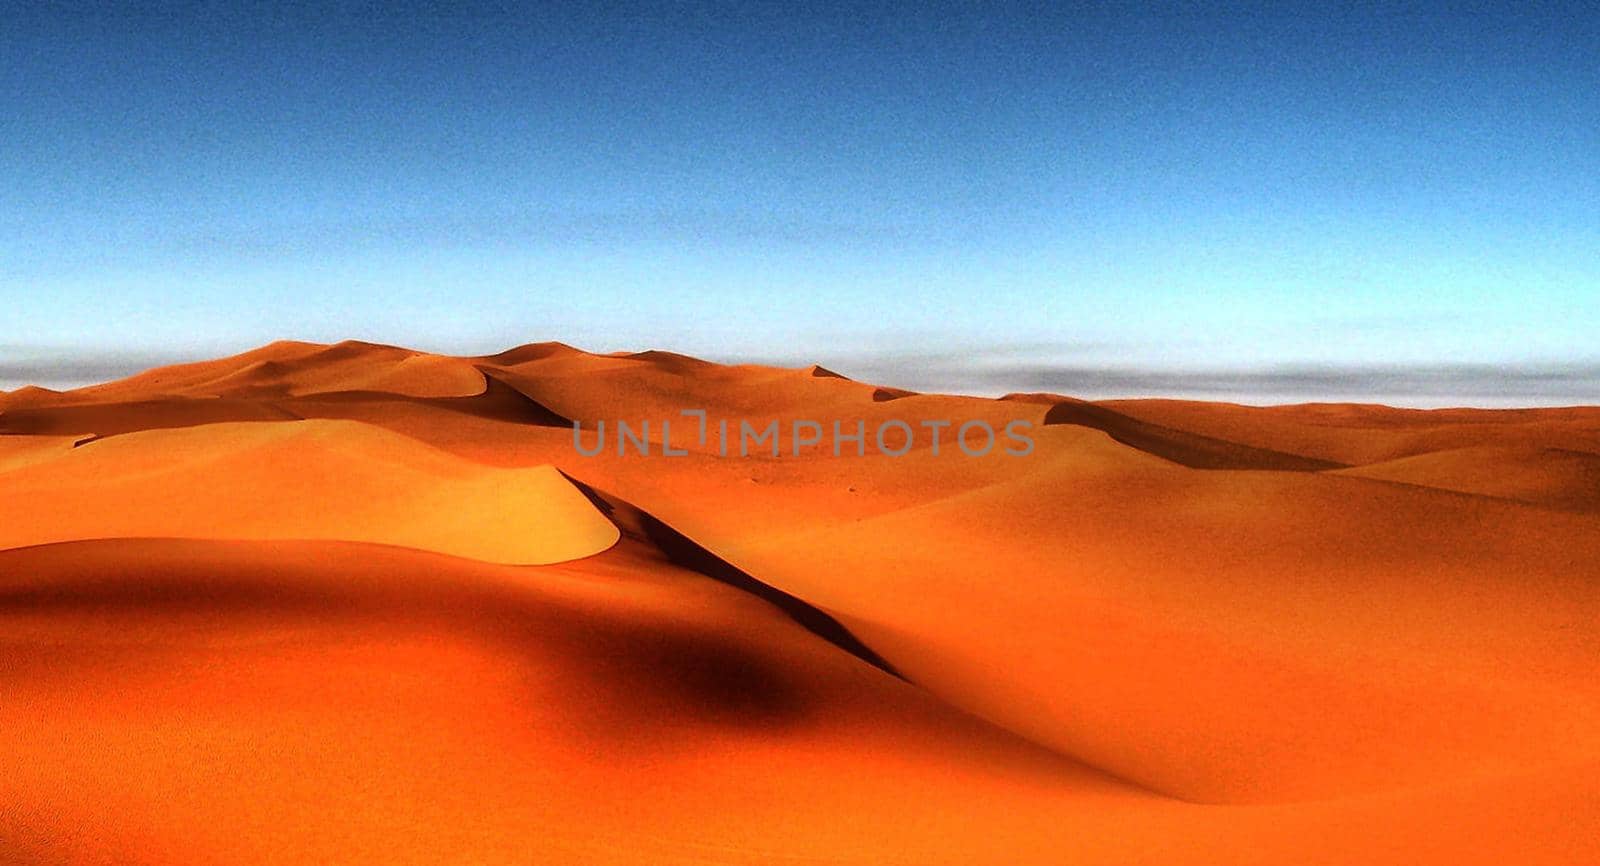 Beautiful pictures of Libya by TravelSync27